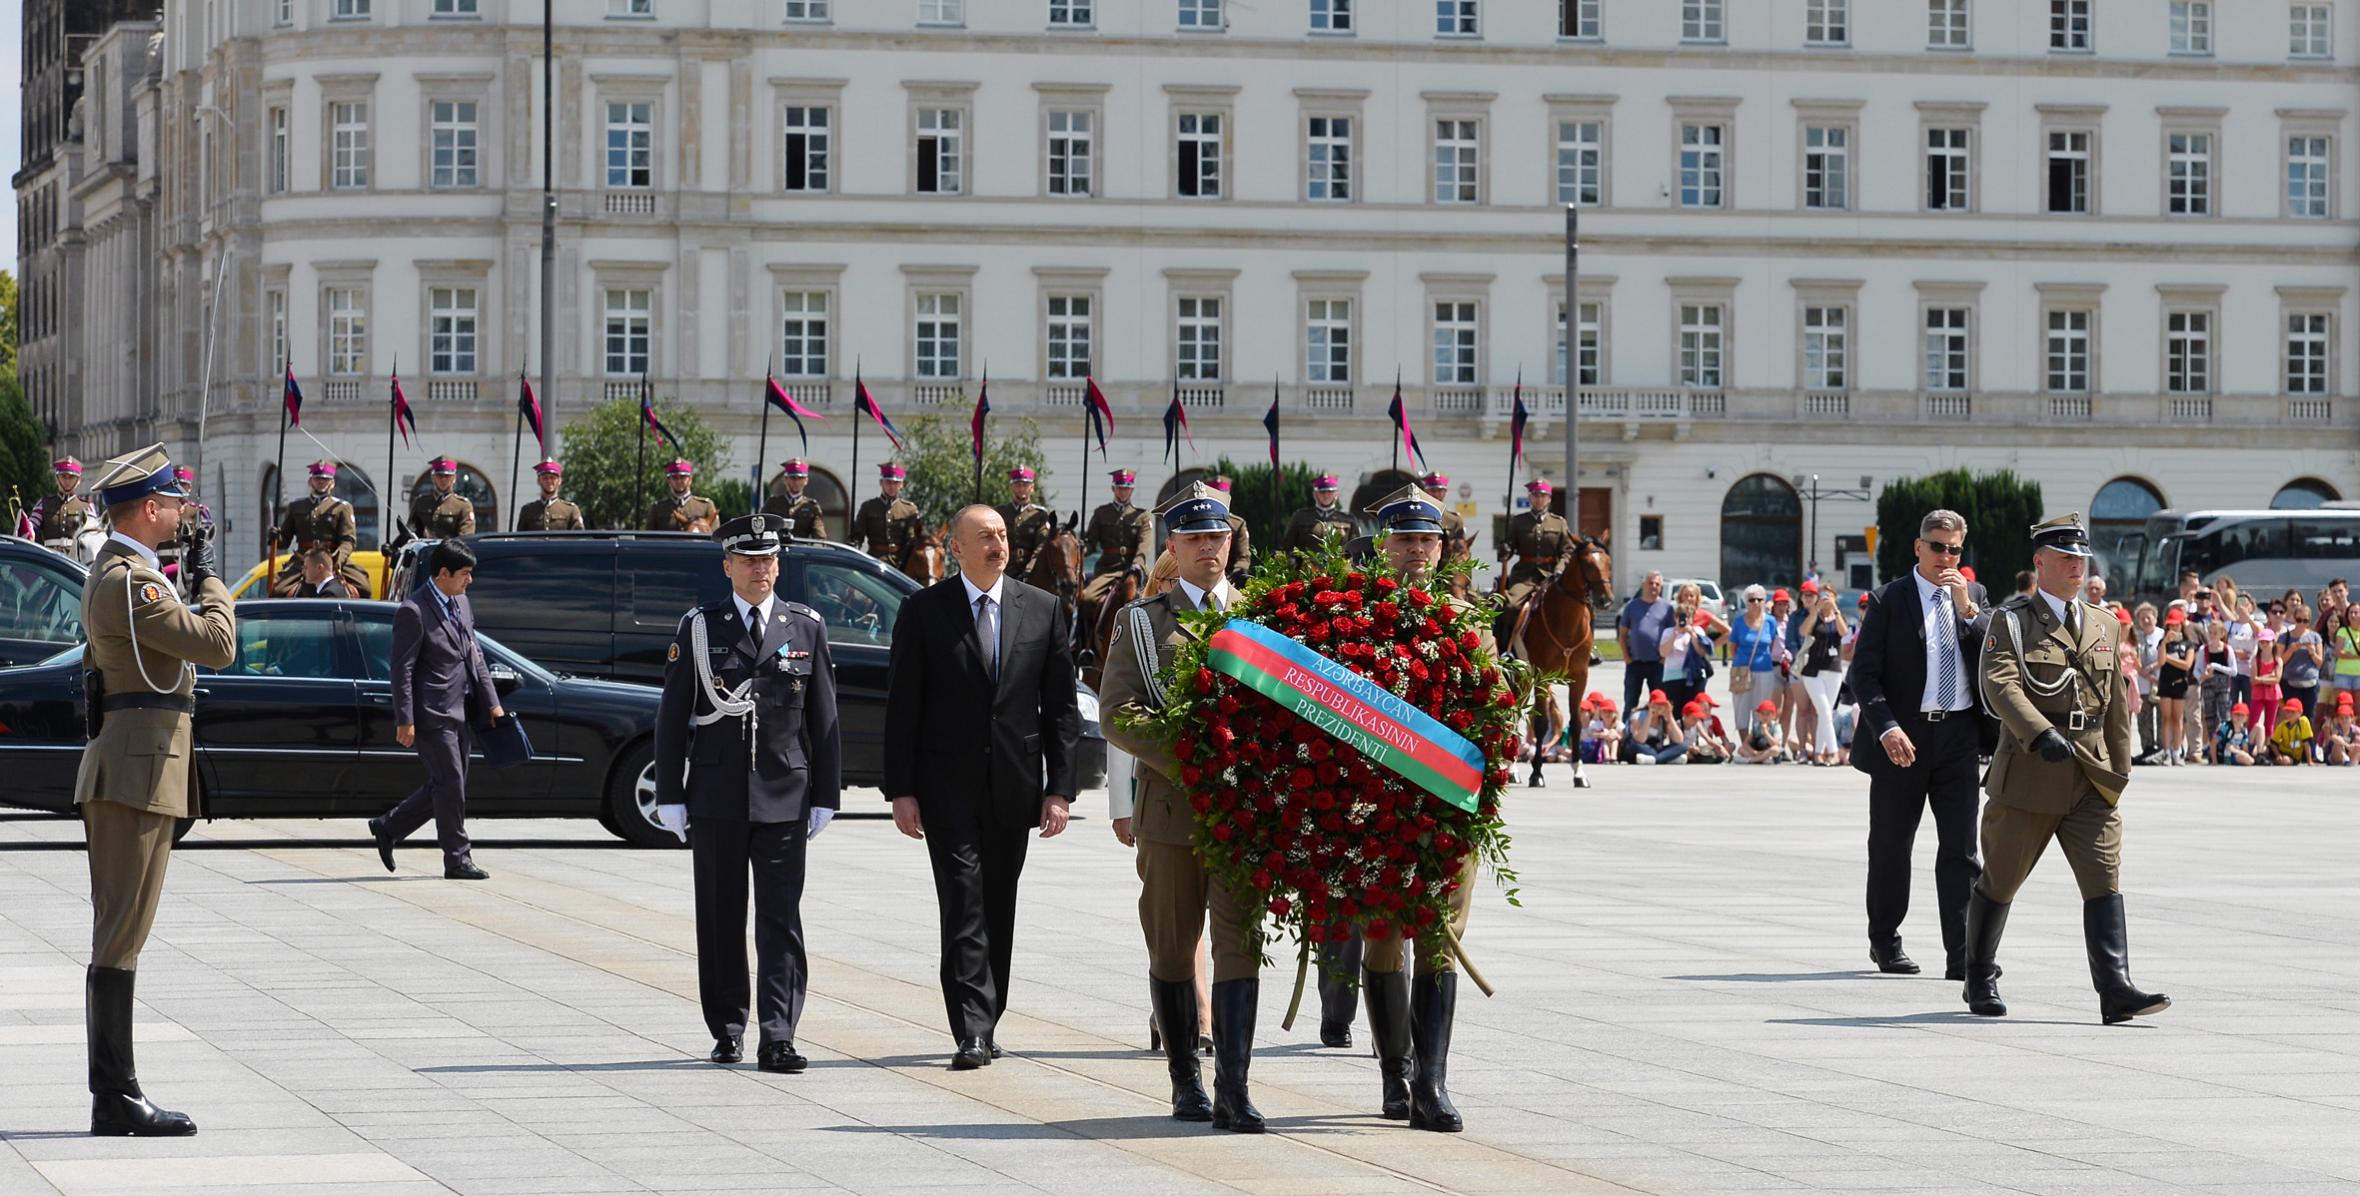 Ilham Aliyev visited the Tomb of the Unknown Soldier in Warsaw